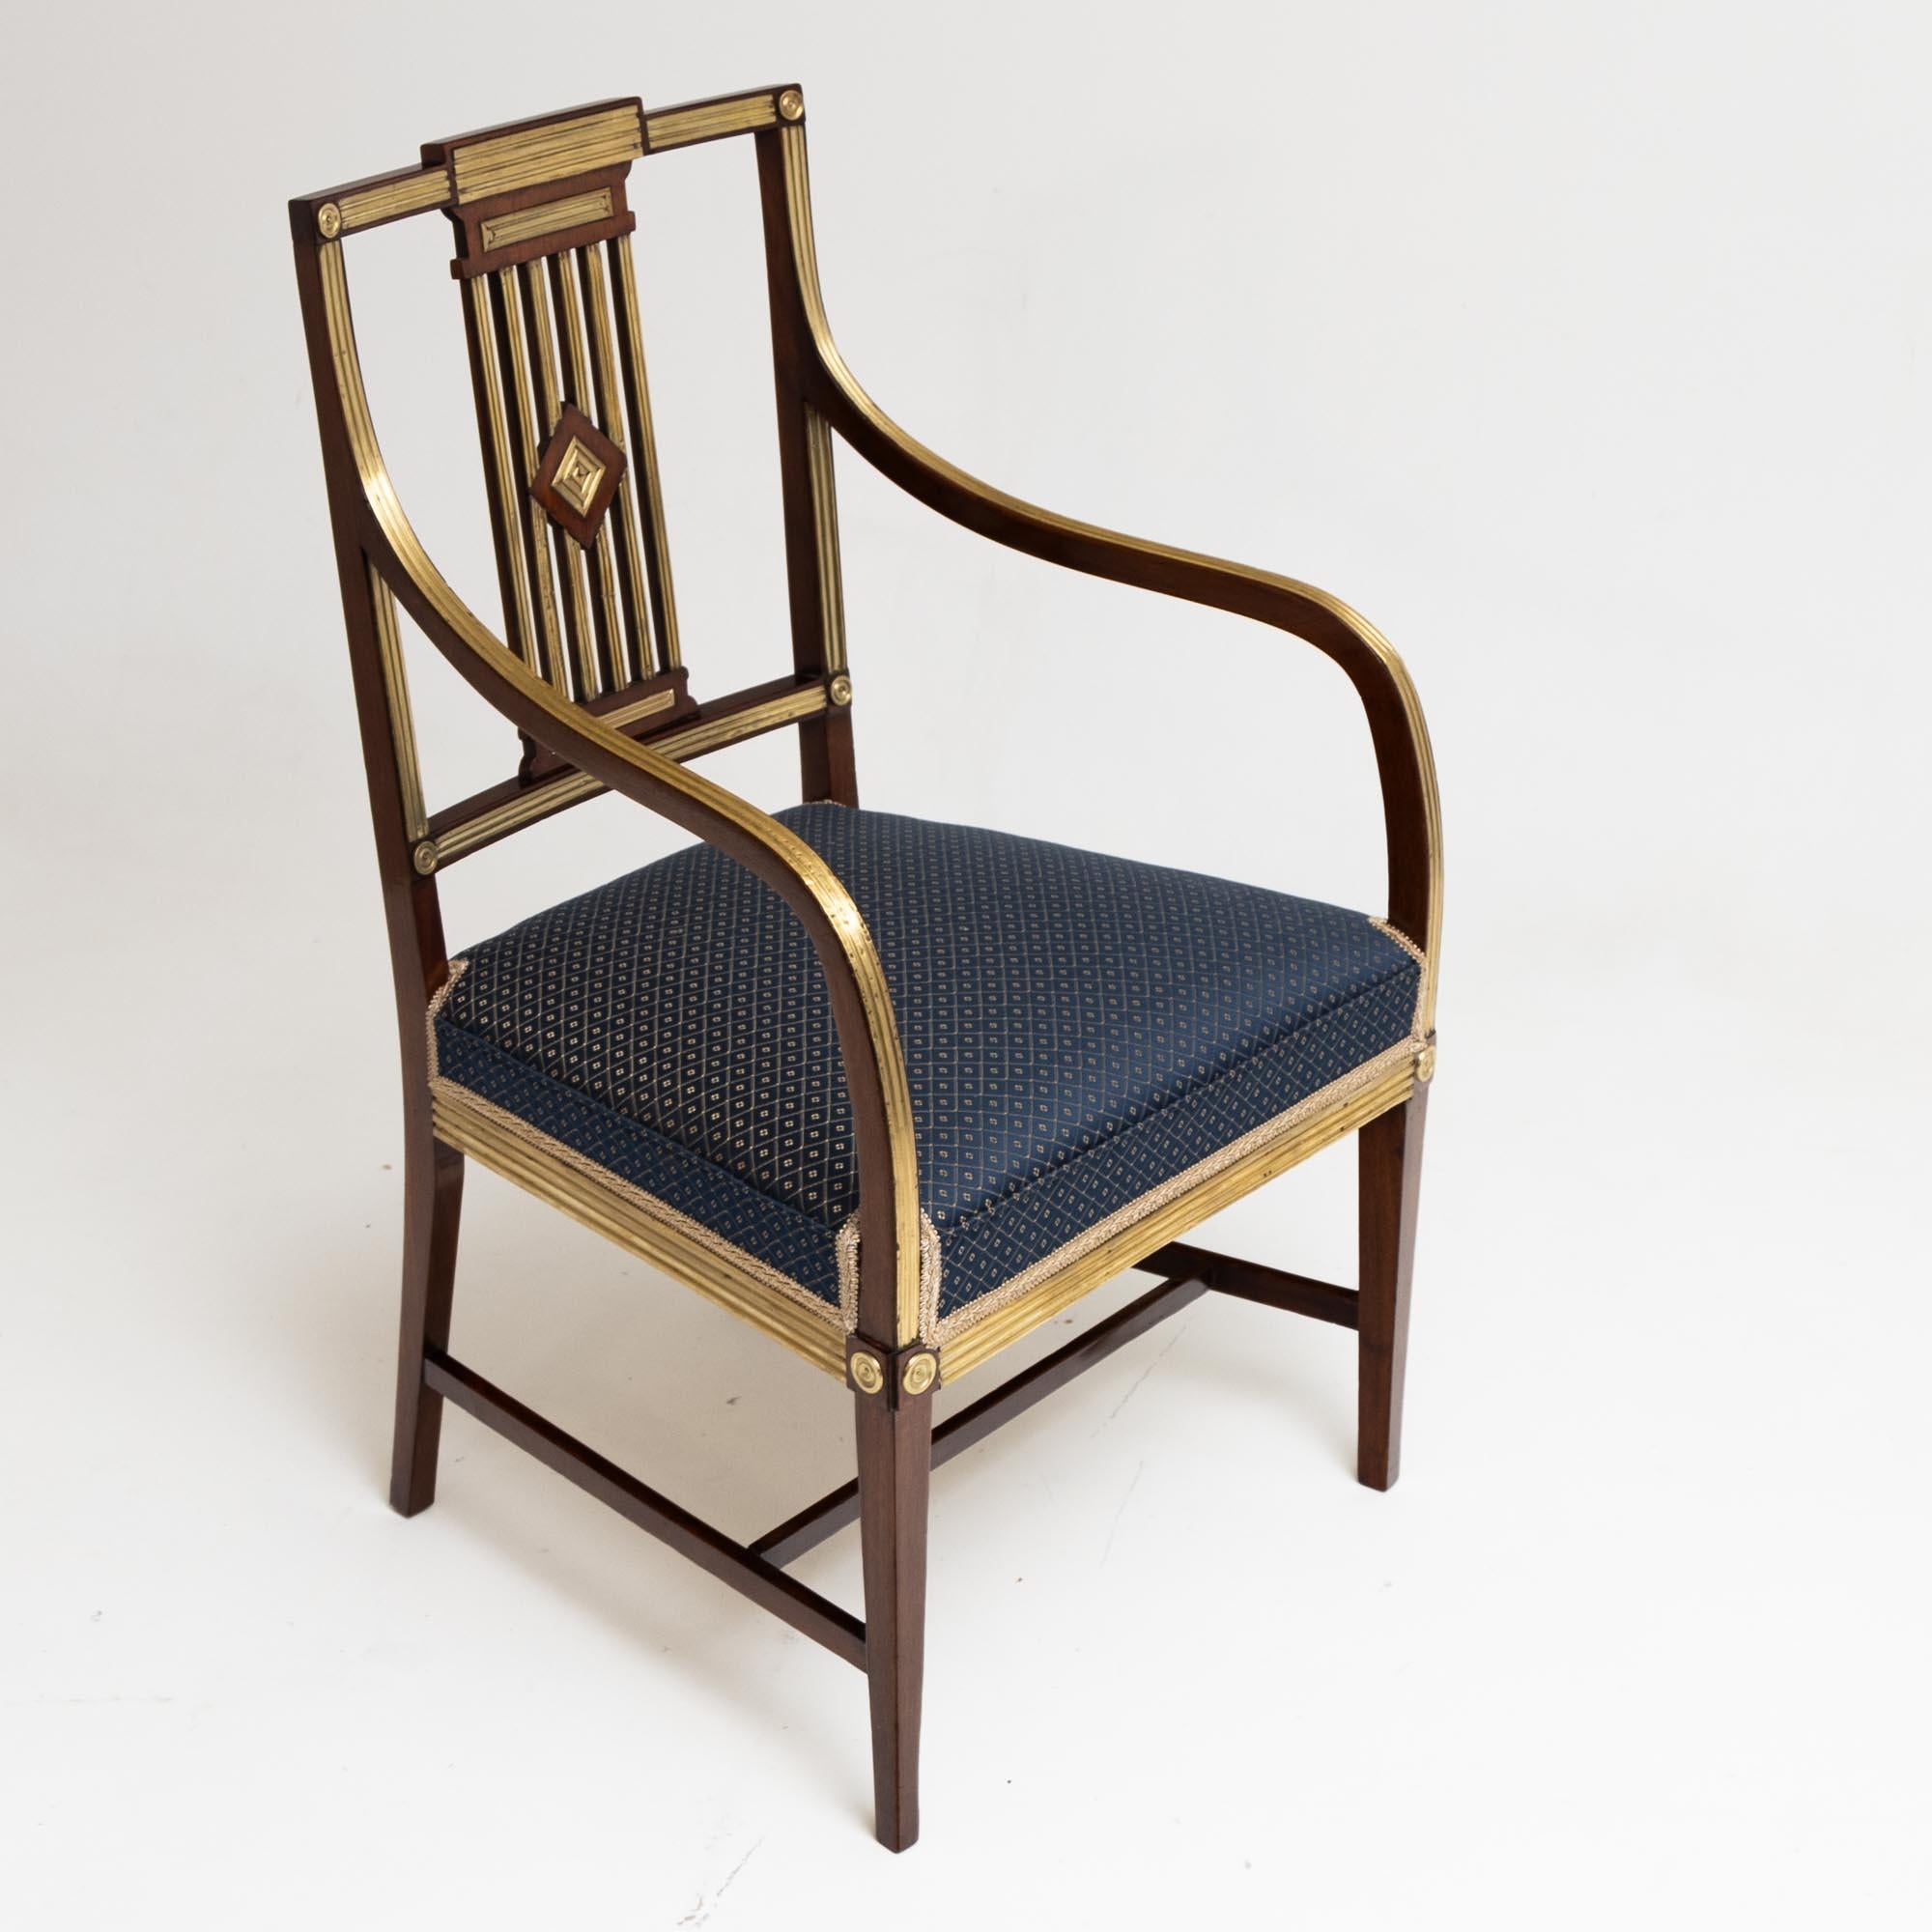 Pair of Neoclassical Dining Room Chairs, Brass, Baltic States, Late 18th Century For Sale 6